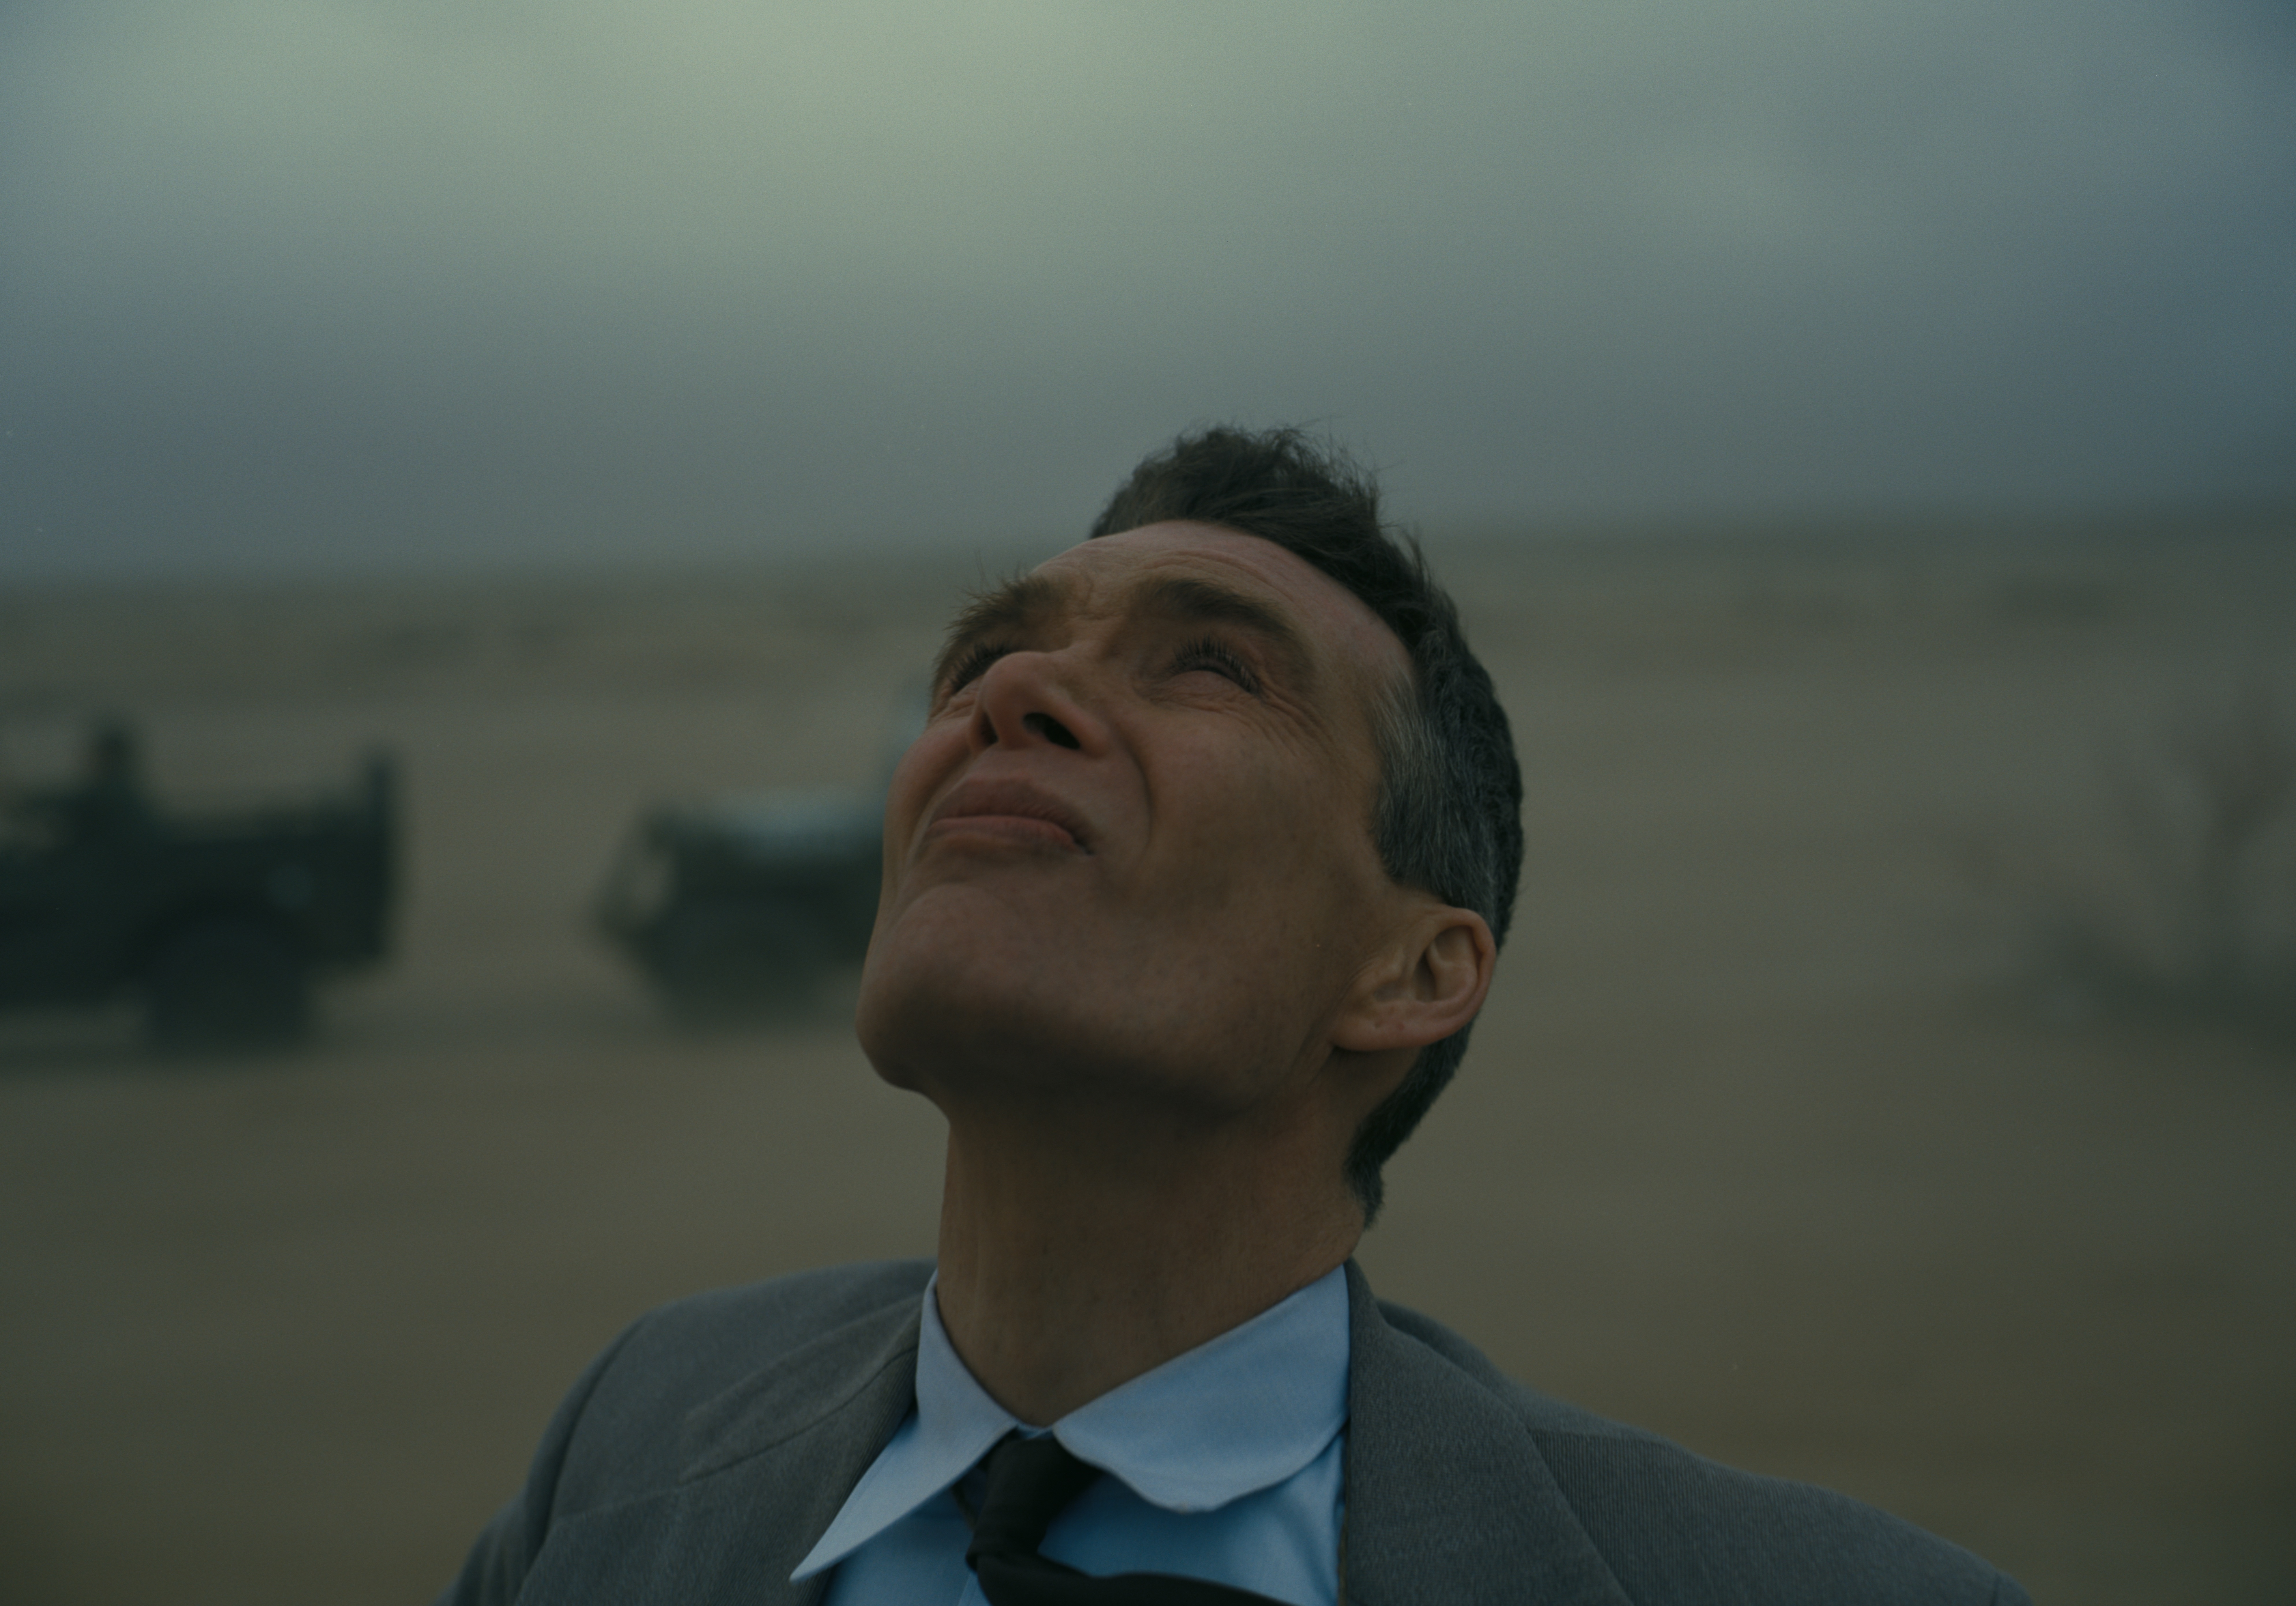 HD desktop wallpaper featuring a thoughtful man in a suit looking skyward with a desolate landscape in the background, reminiscent of Oppenheimer, evoking a contemplative mood.